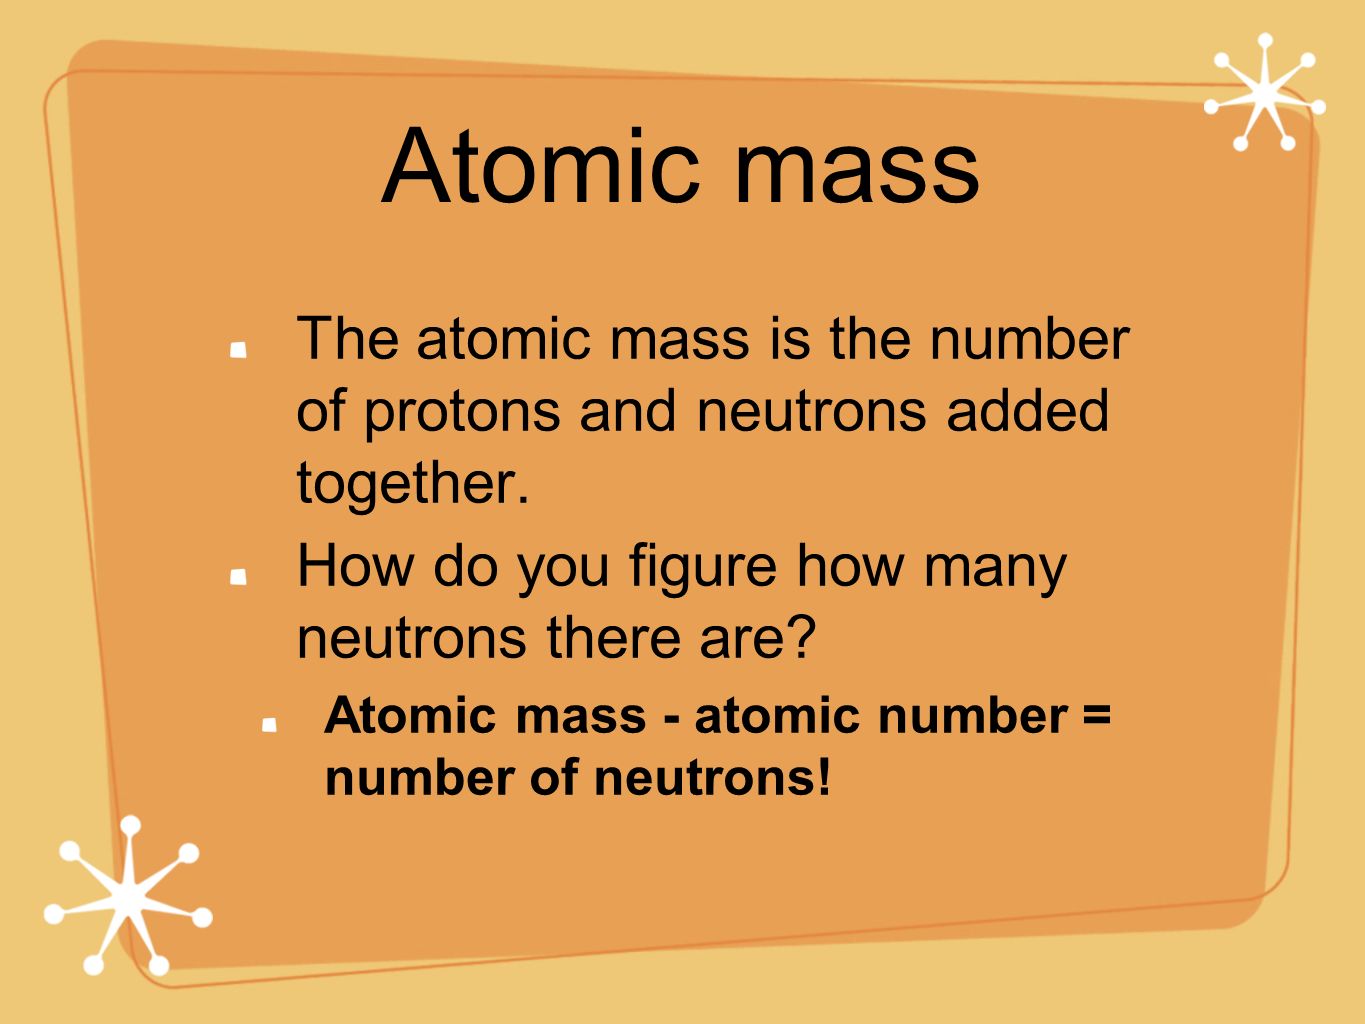 Atomic mass The atomic mass is the number of protons and neutrons added together.